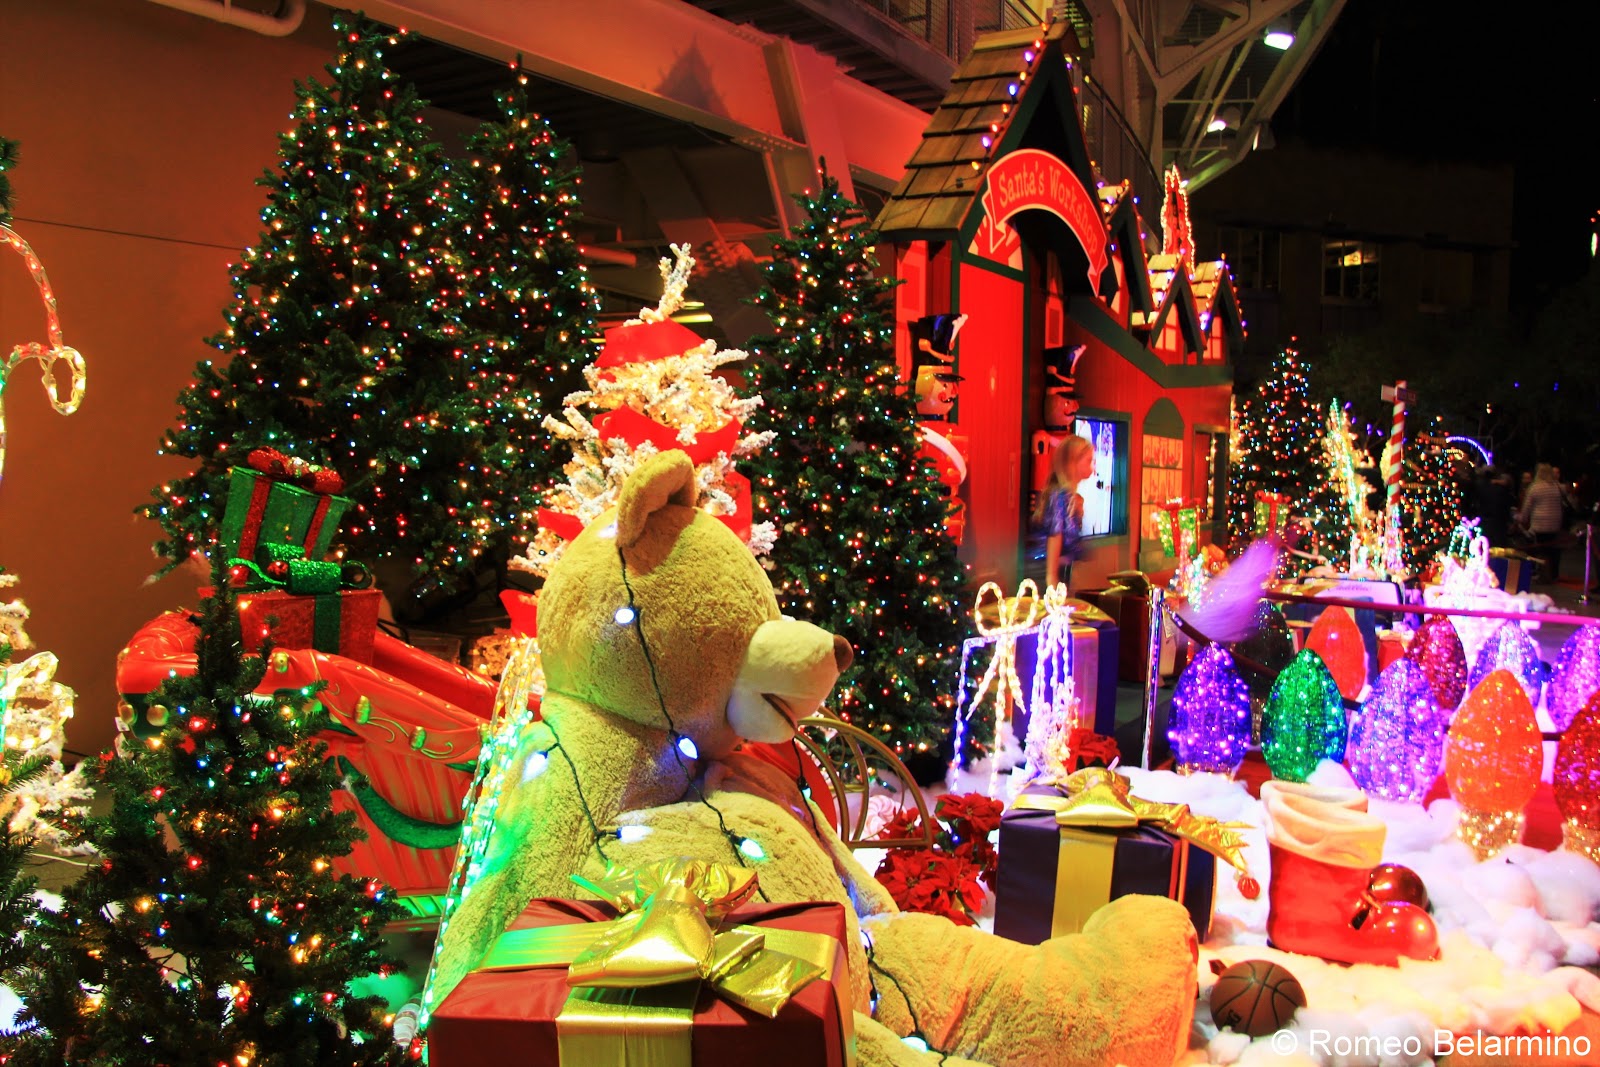 5 Festive Christmas Things to Do in San Diego Travel the World